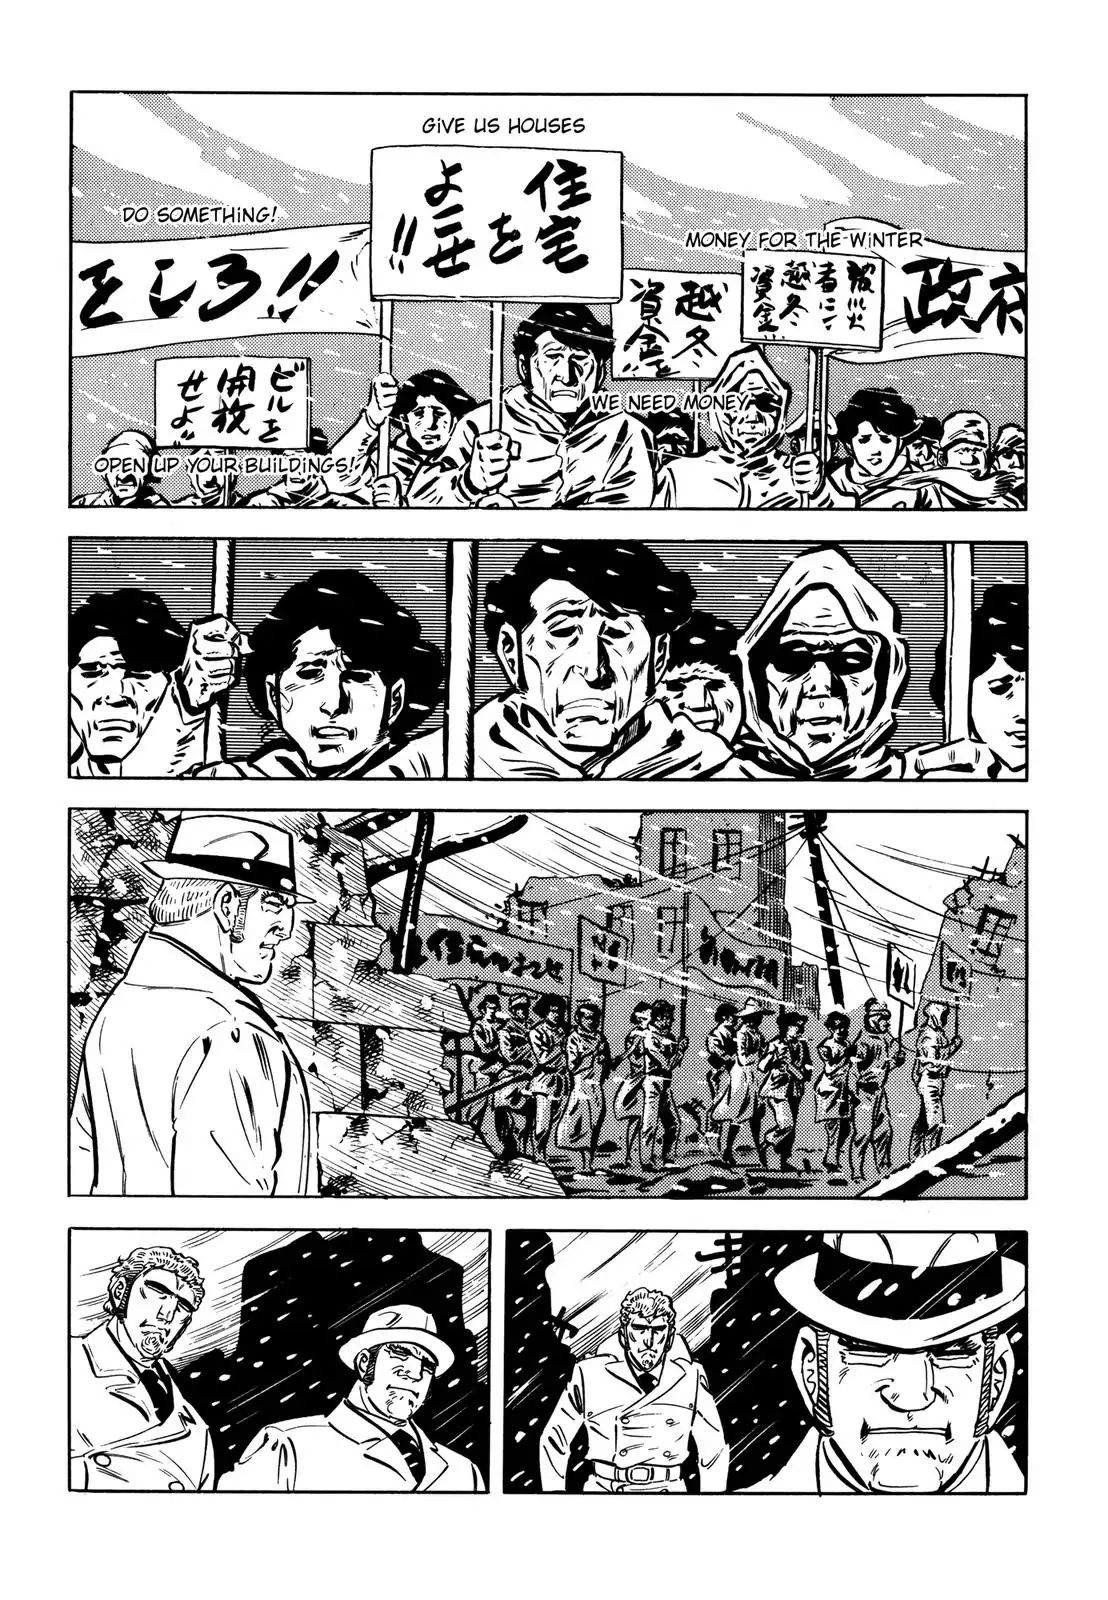 Japan Sinks (Takao Saito) Vol.2 Chapter 6: The Sinking Country